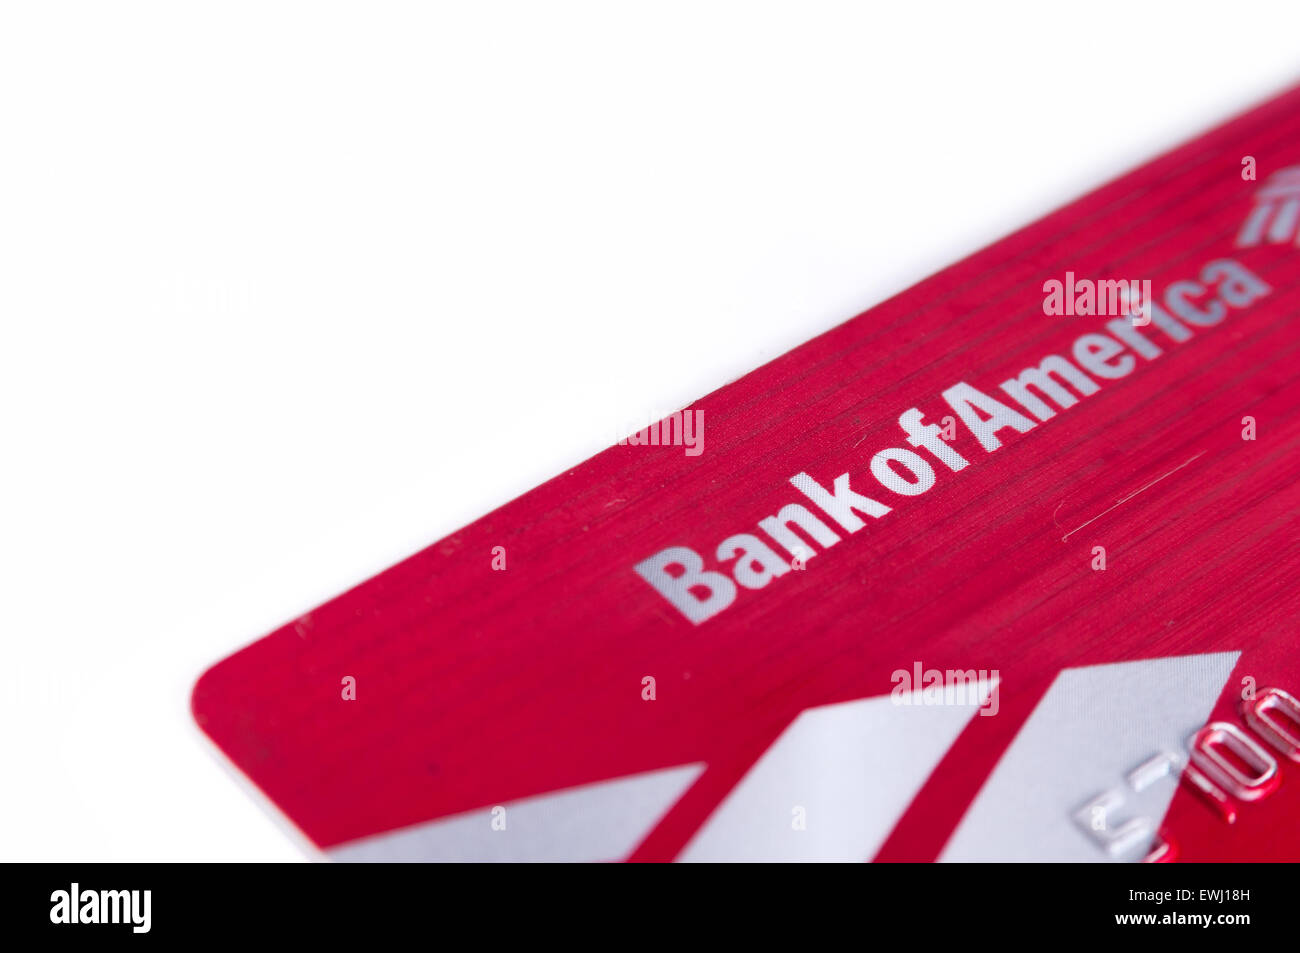 Bank of america cash rewards credit card close up on white background Stock Photo